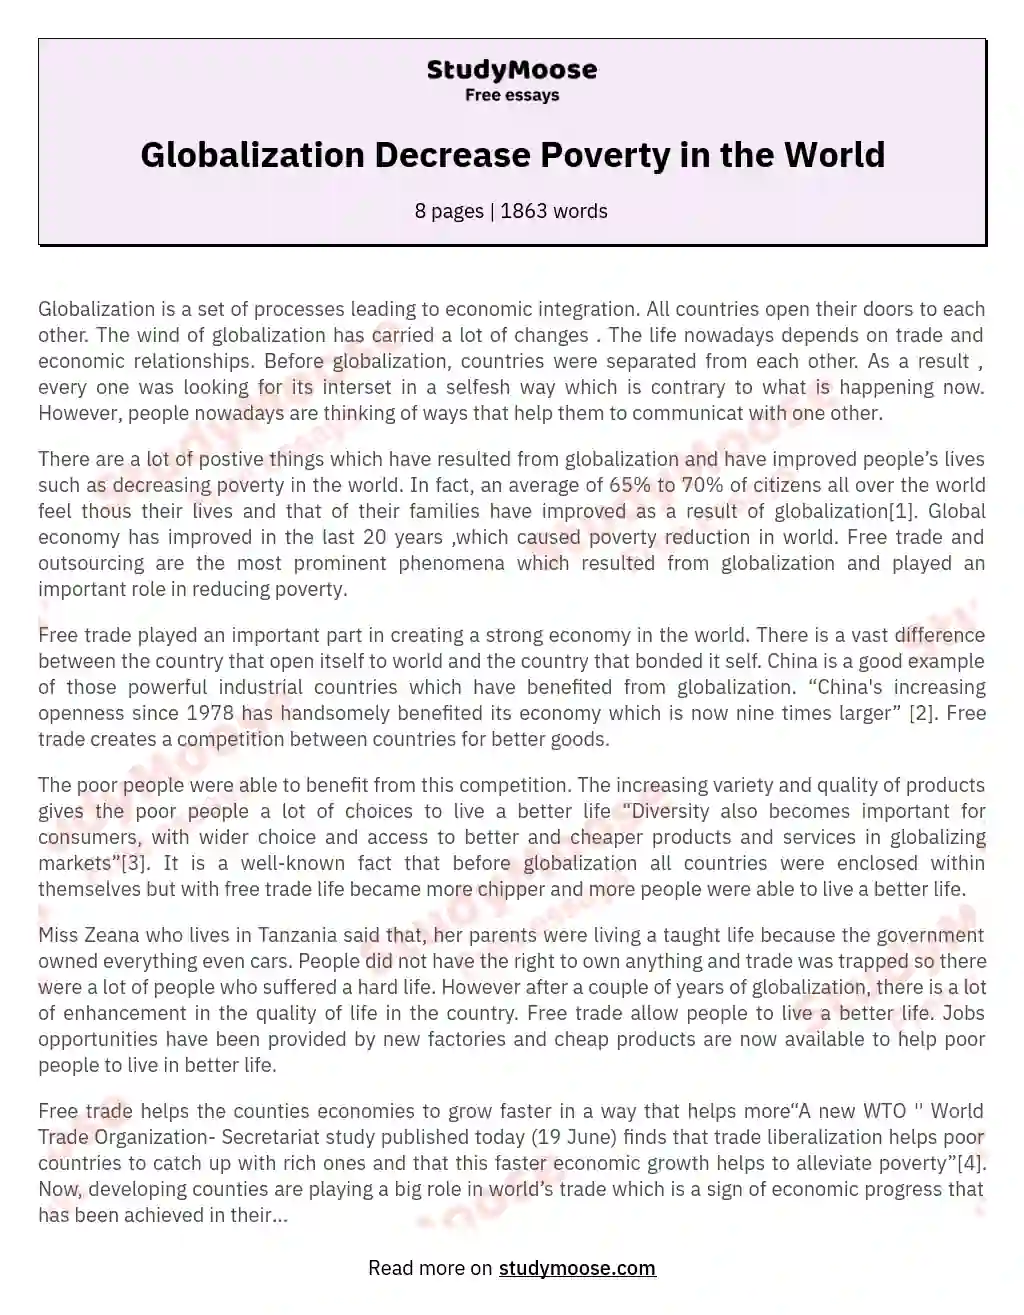 Globalization Decrease Poverty in the World essay